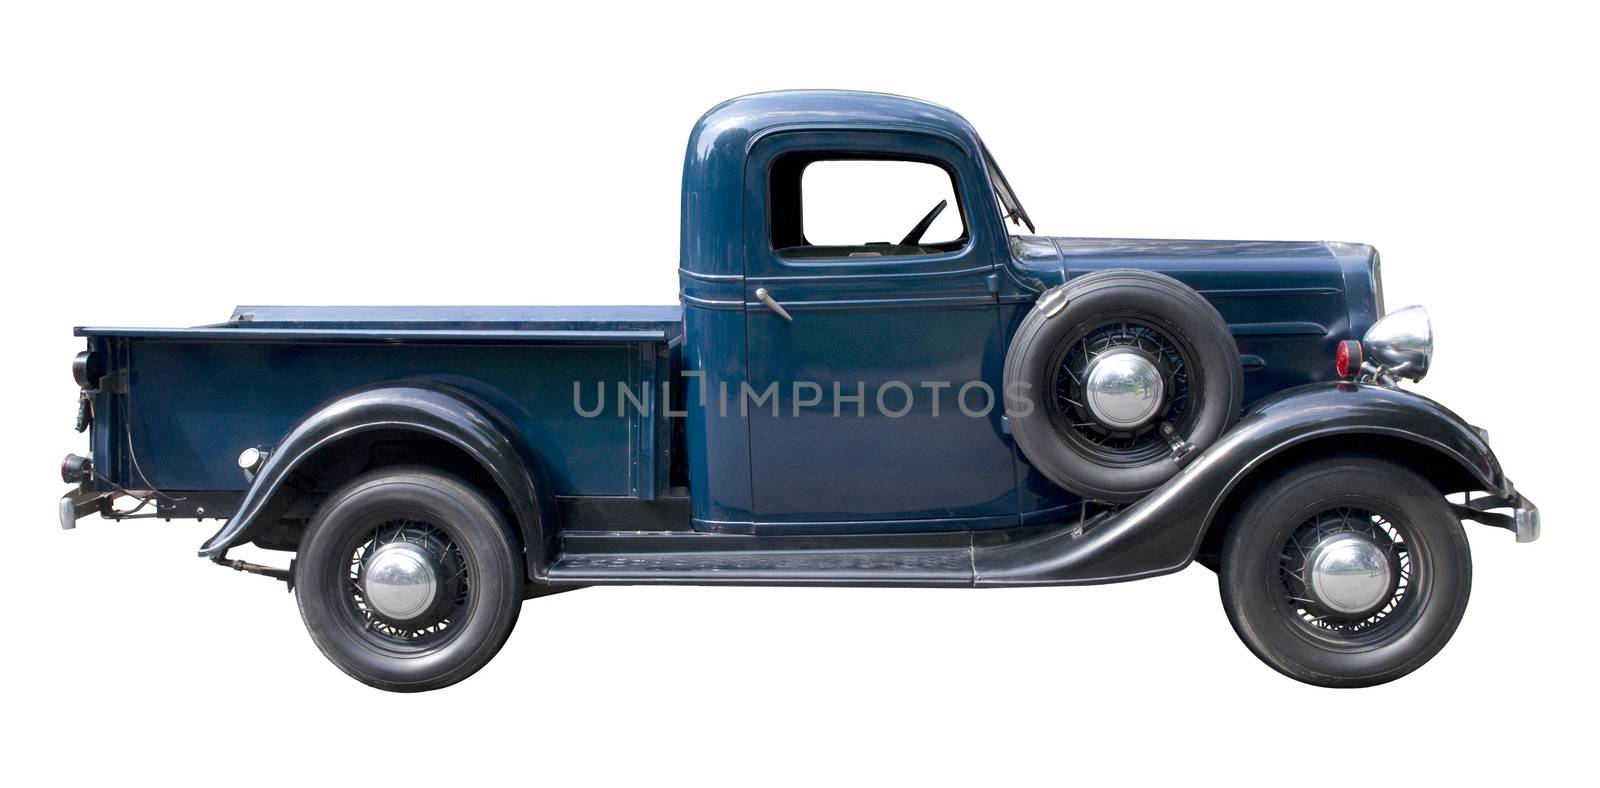 Blue vintage pickup truck from 1930s by Balefire9